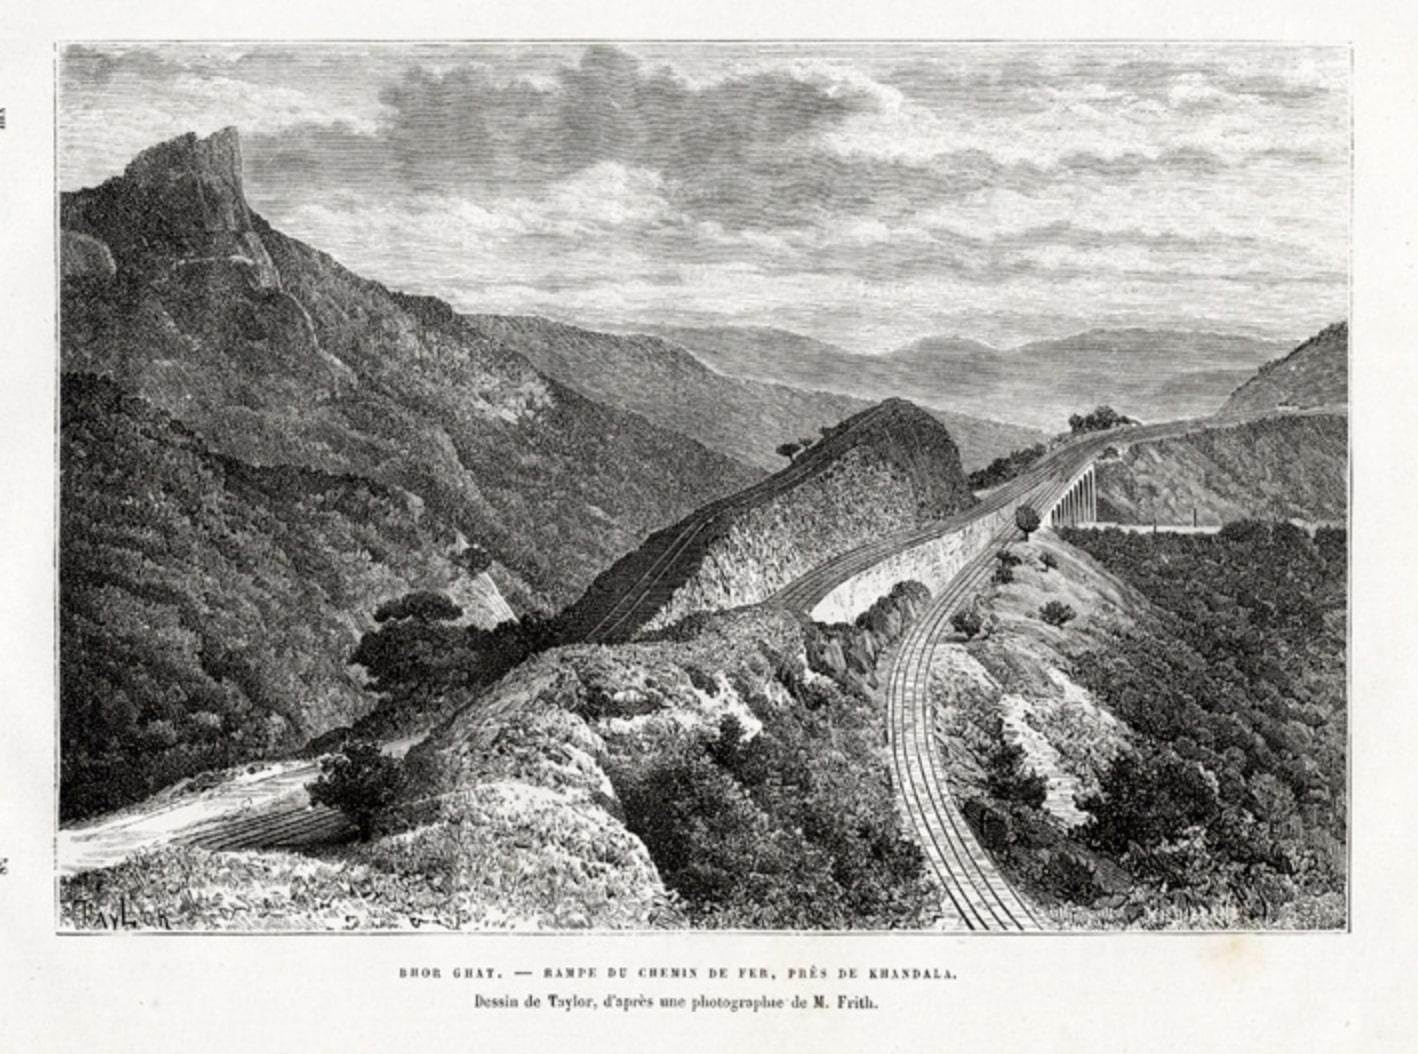 Plate: 'Bhor Ghat, 'Rampe du Chemin de fer, pres de Khandala'. This plate shows the Bhor Ghat a mountain passage located between Karjat and Khandala in Maharashtra, India. This plate originates from: 'Nouvelle Geographie Universelle. La Terre et les